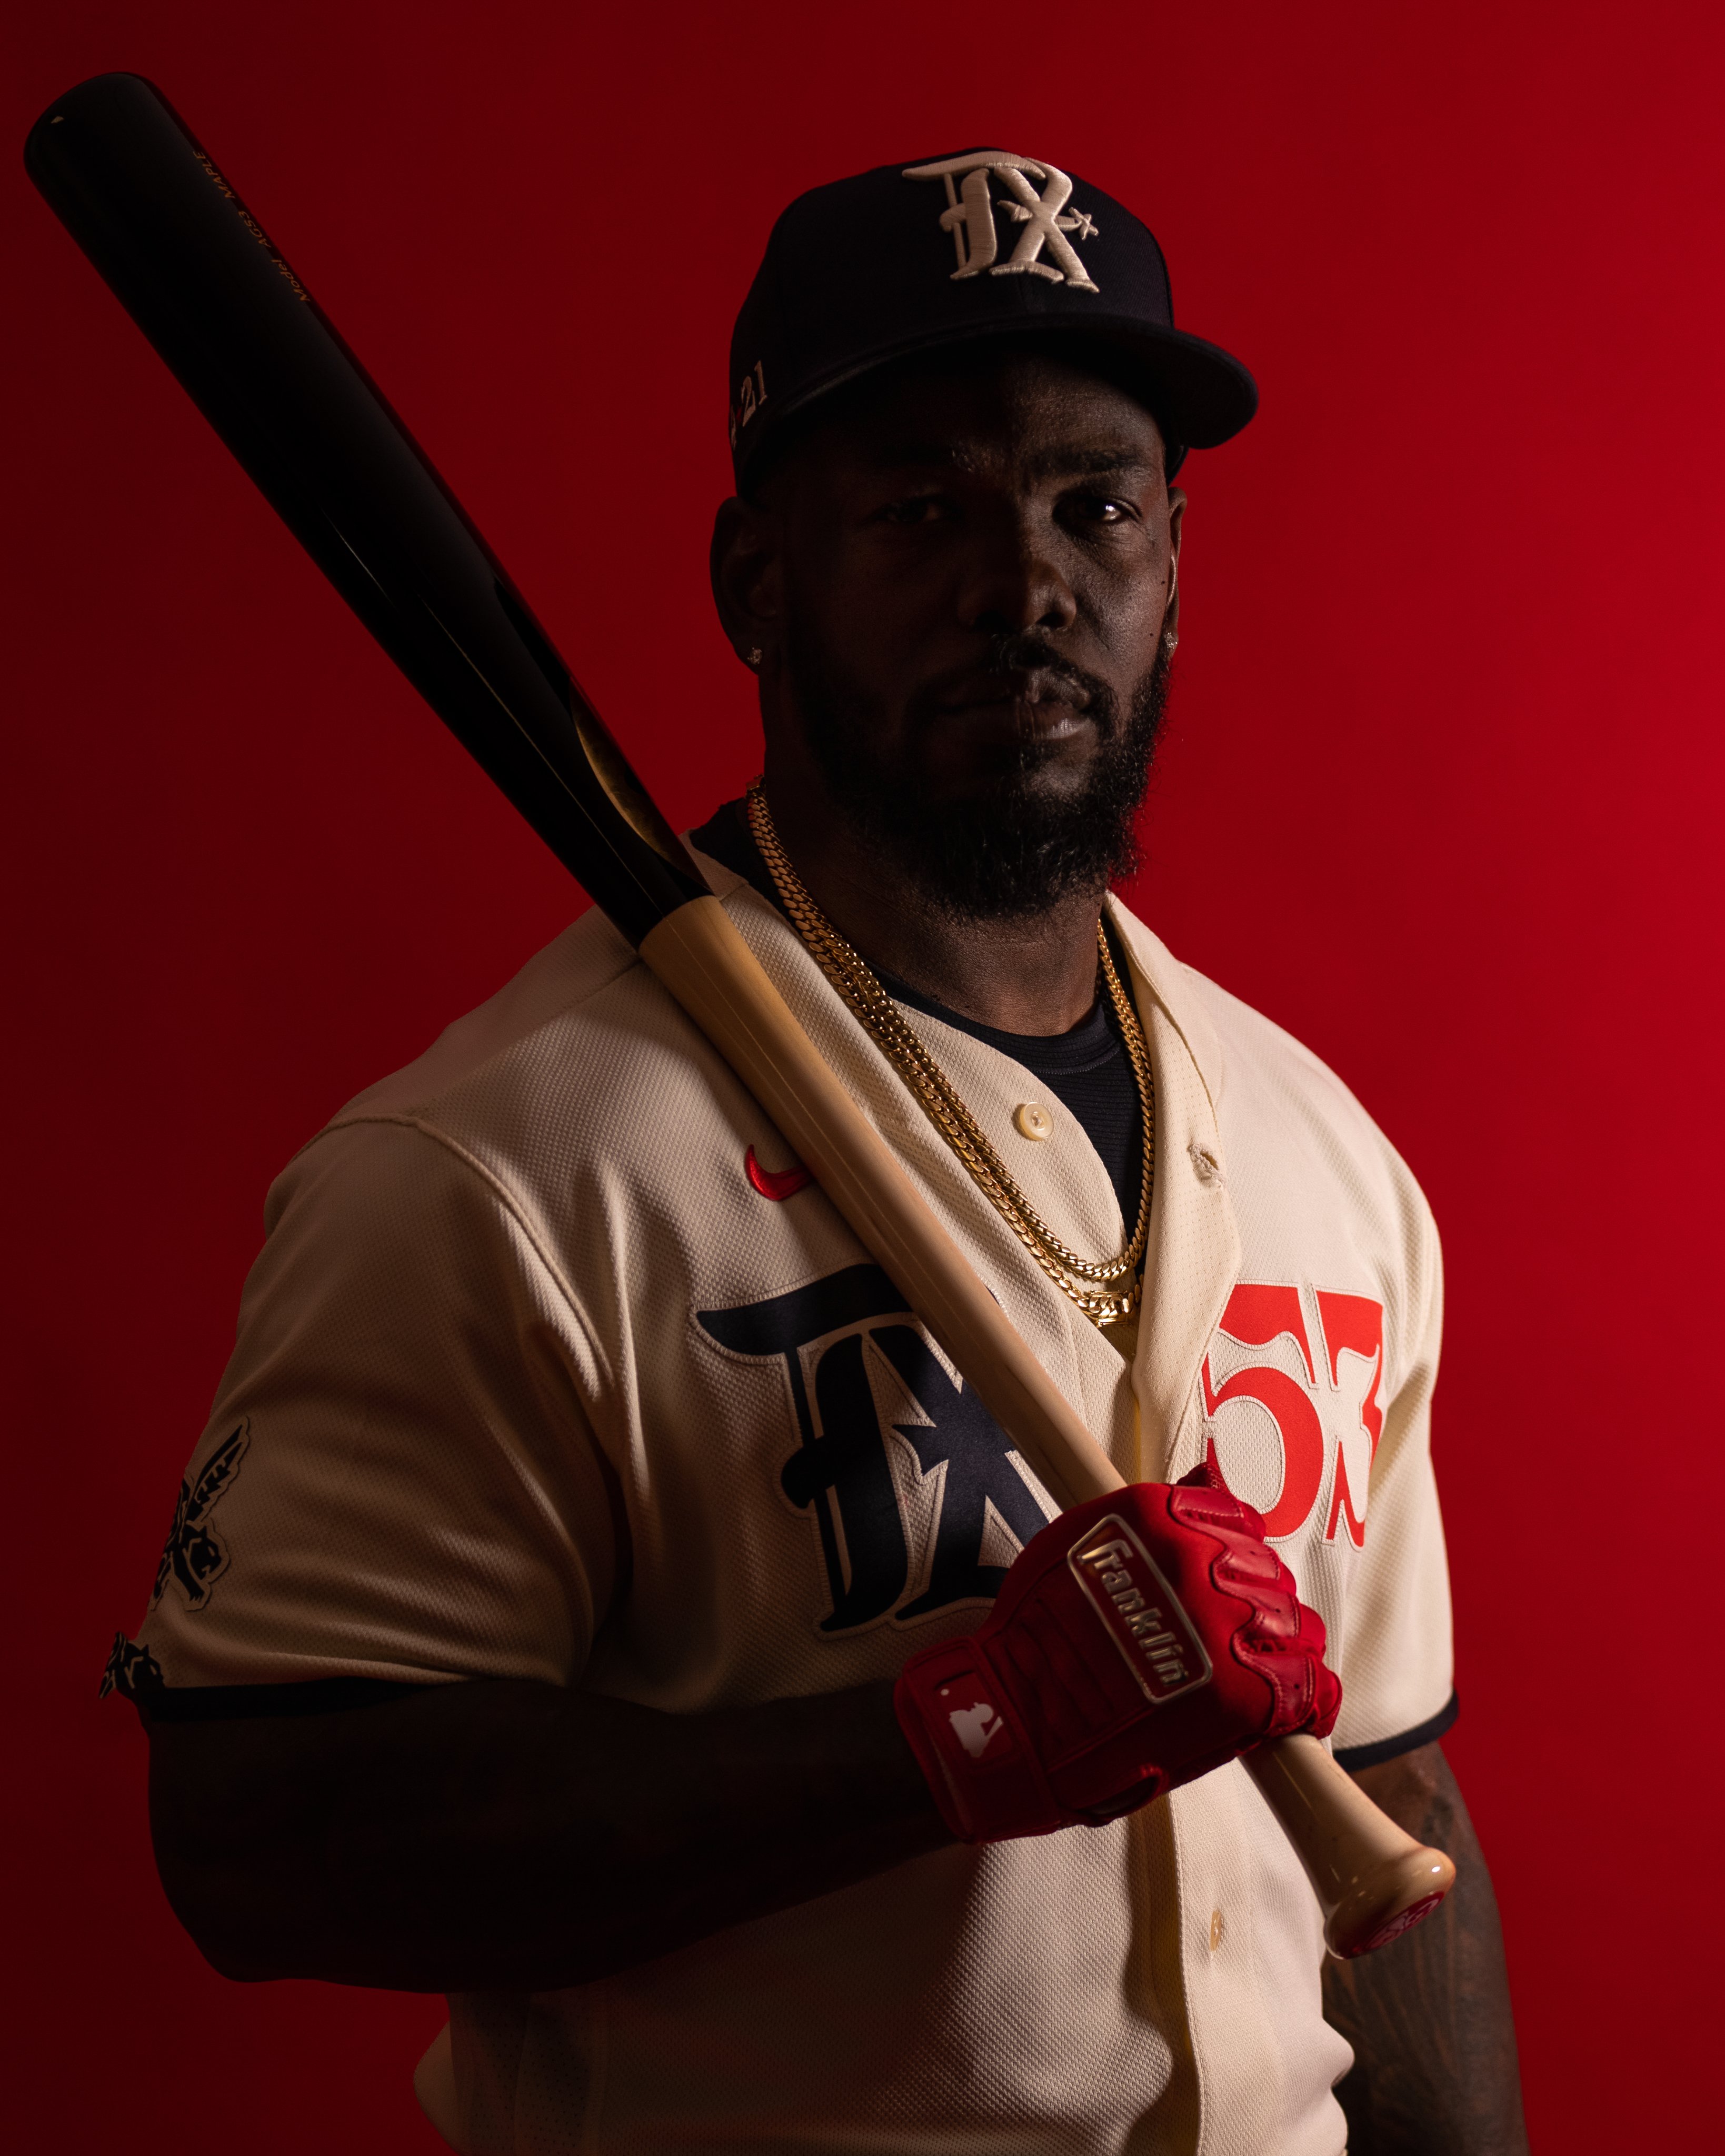 The @rangers will wear their City Connect uniforms on Friday and